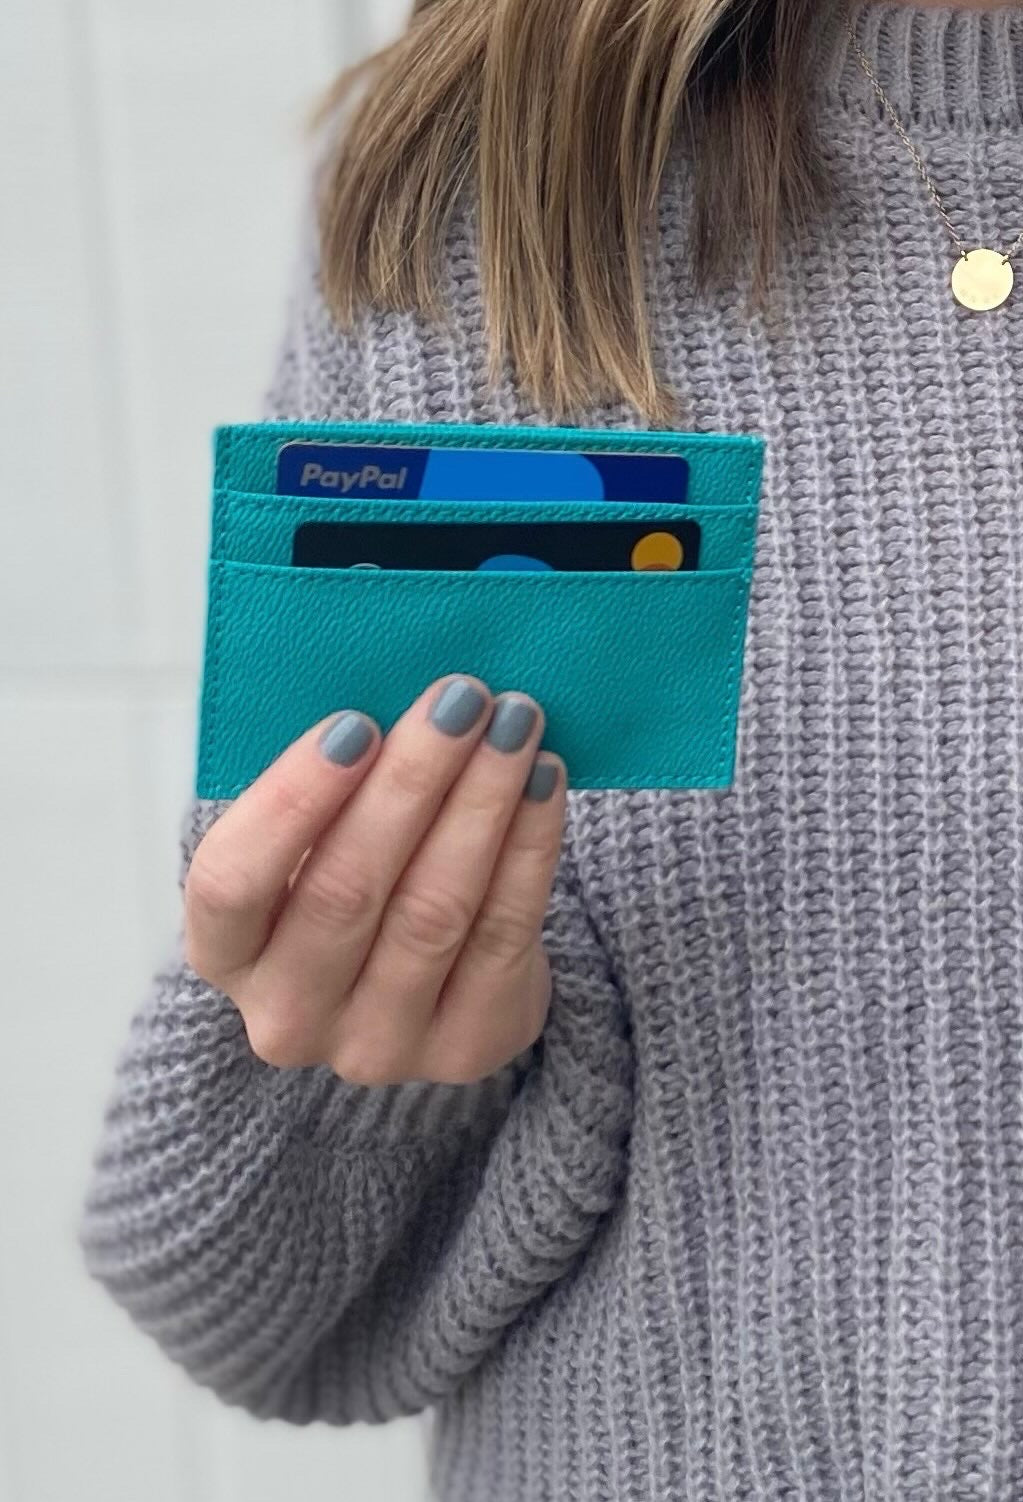 The Vegan Leather Credit Card Sleeve